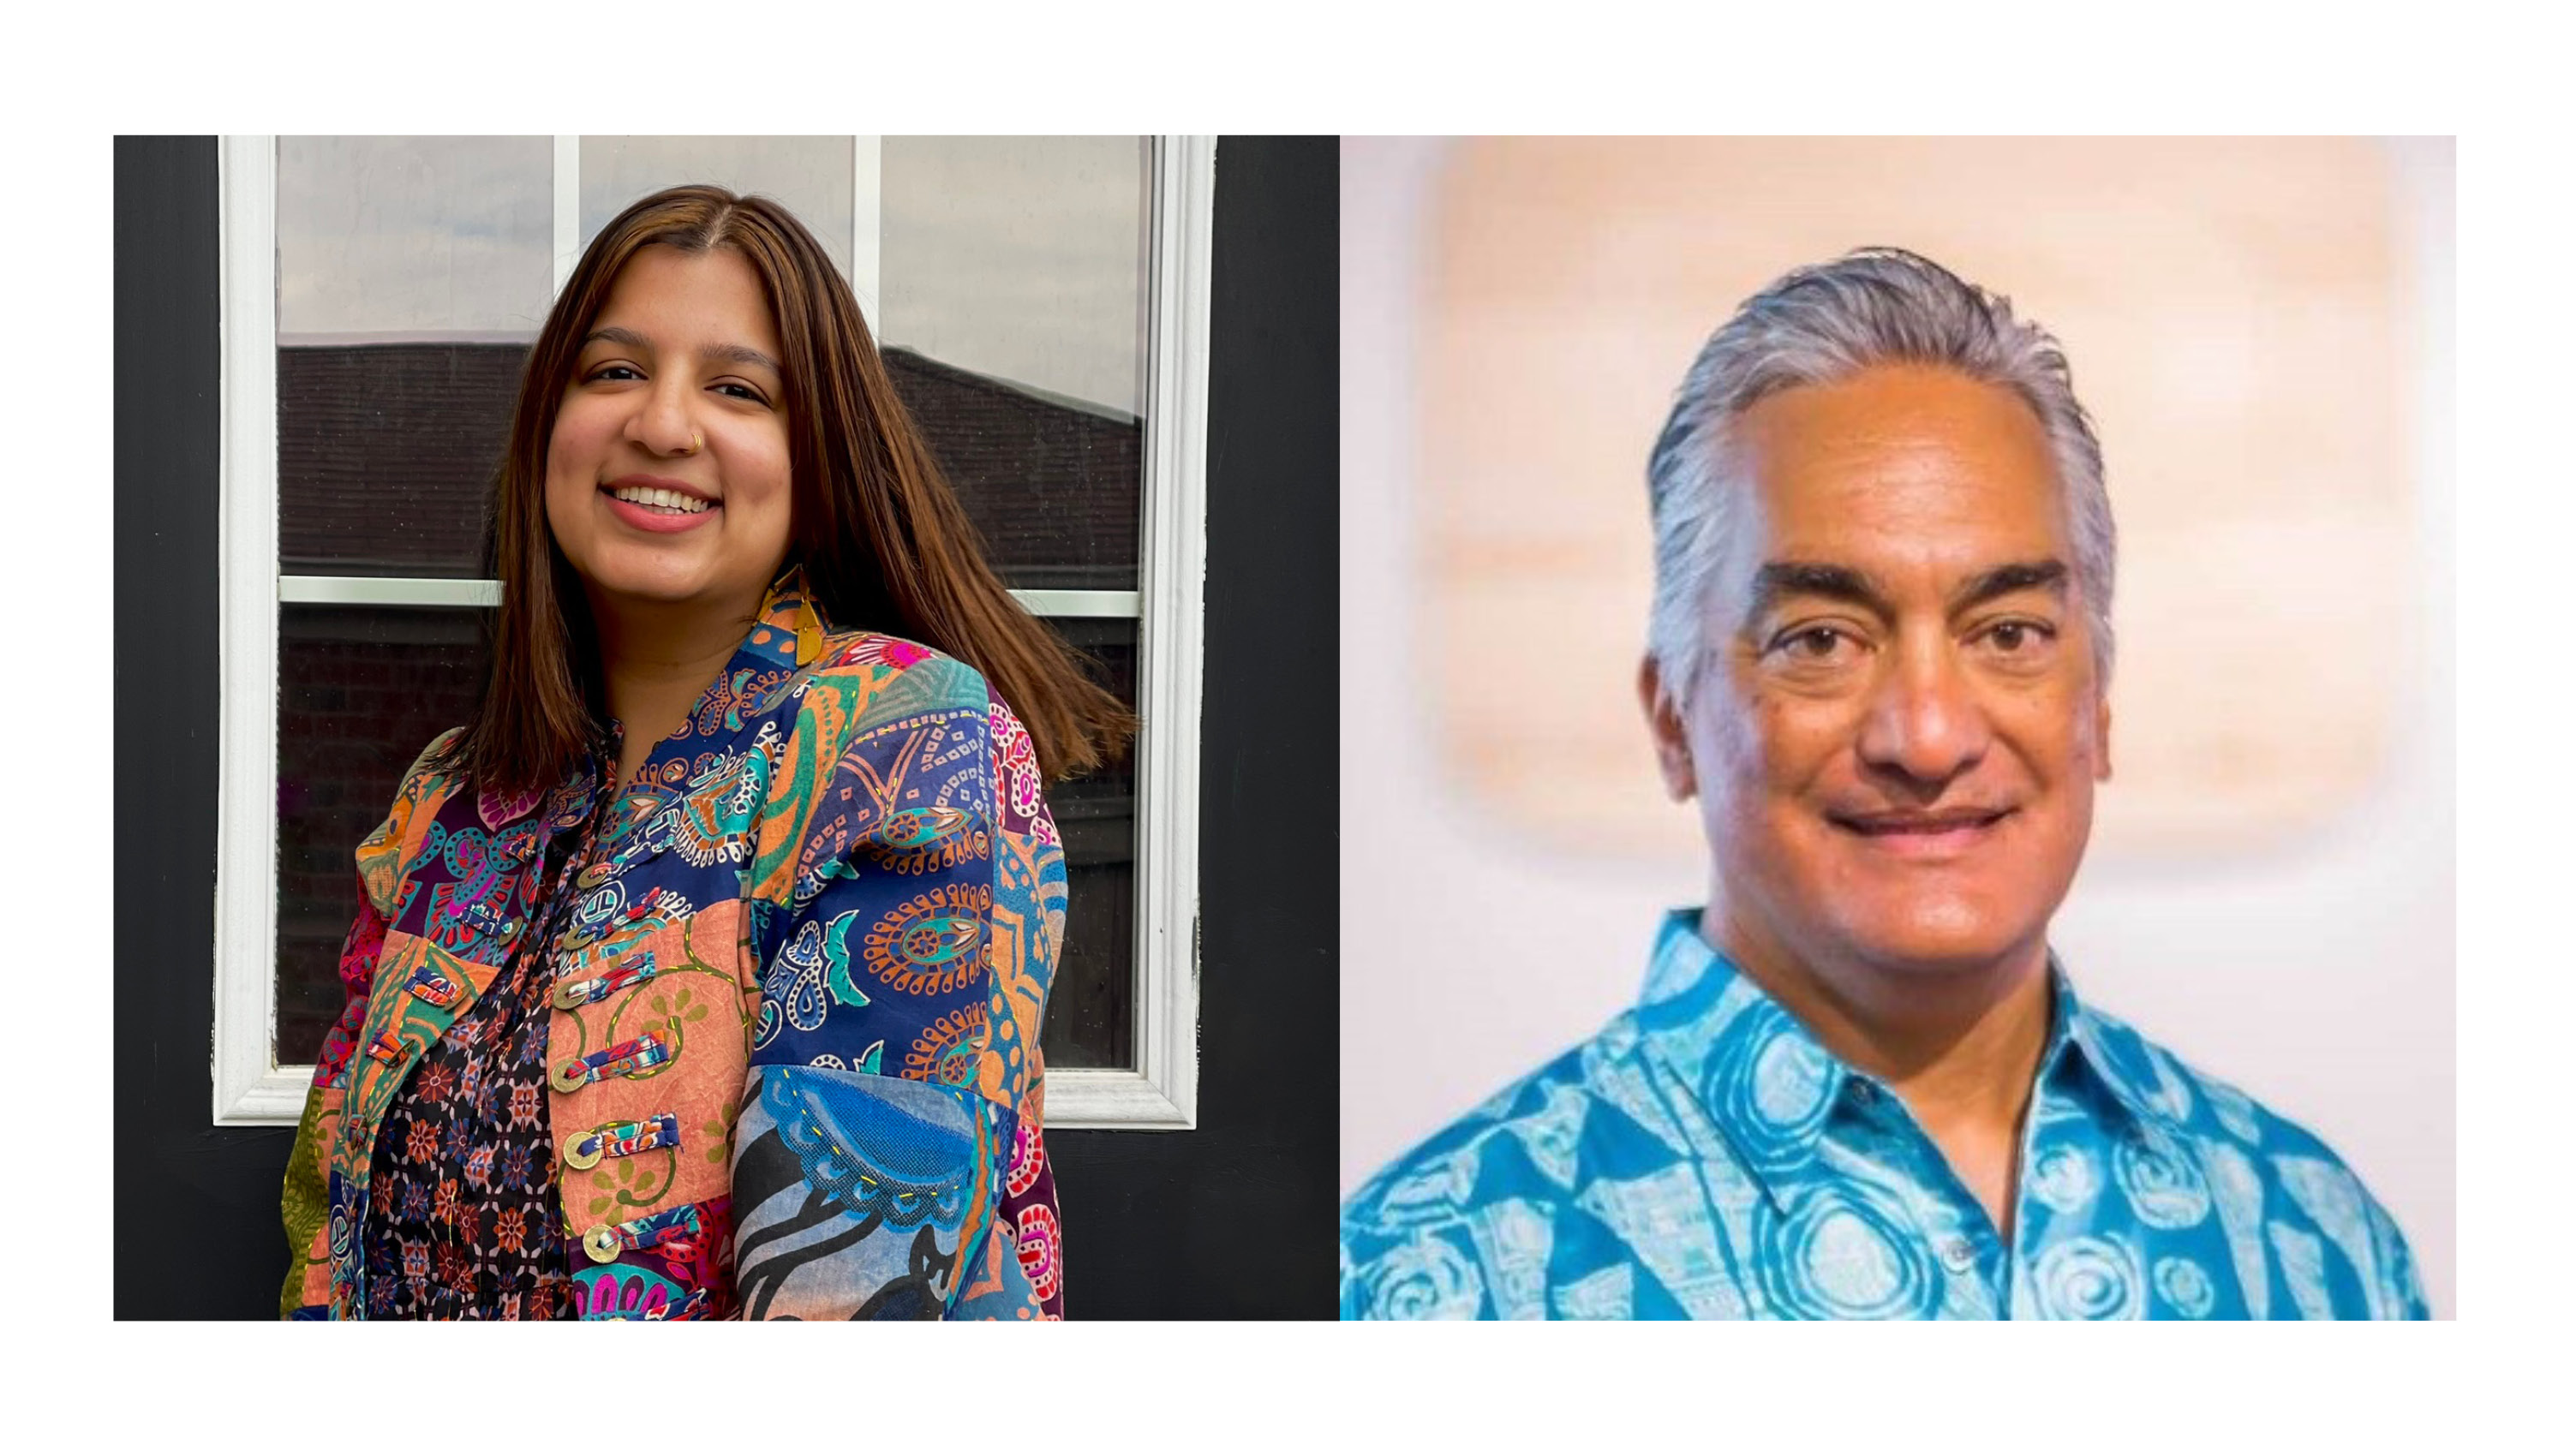 On the left: a woman with shoulder length hair smiling at the camera wearing multi-colour shirt. On the right, a man with short grey hair wearing blue patterned shirt smiling at the camera. 